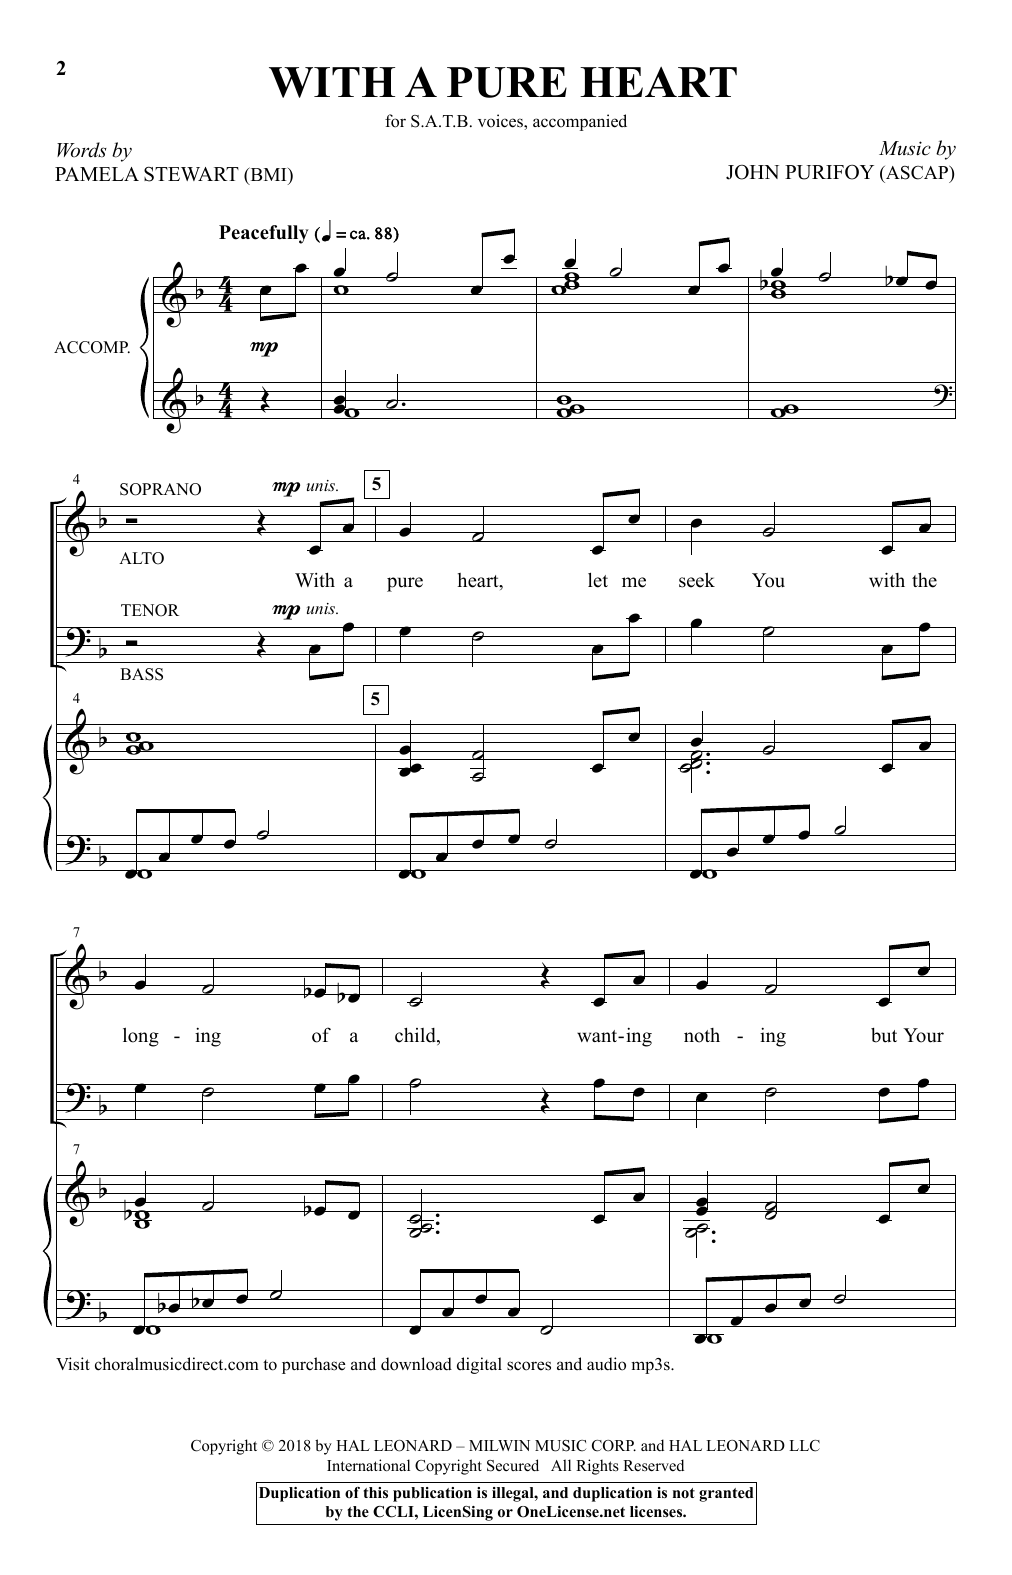 Download John Purifoy With A Pure Heart Sheet Music